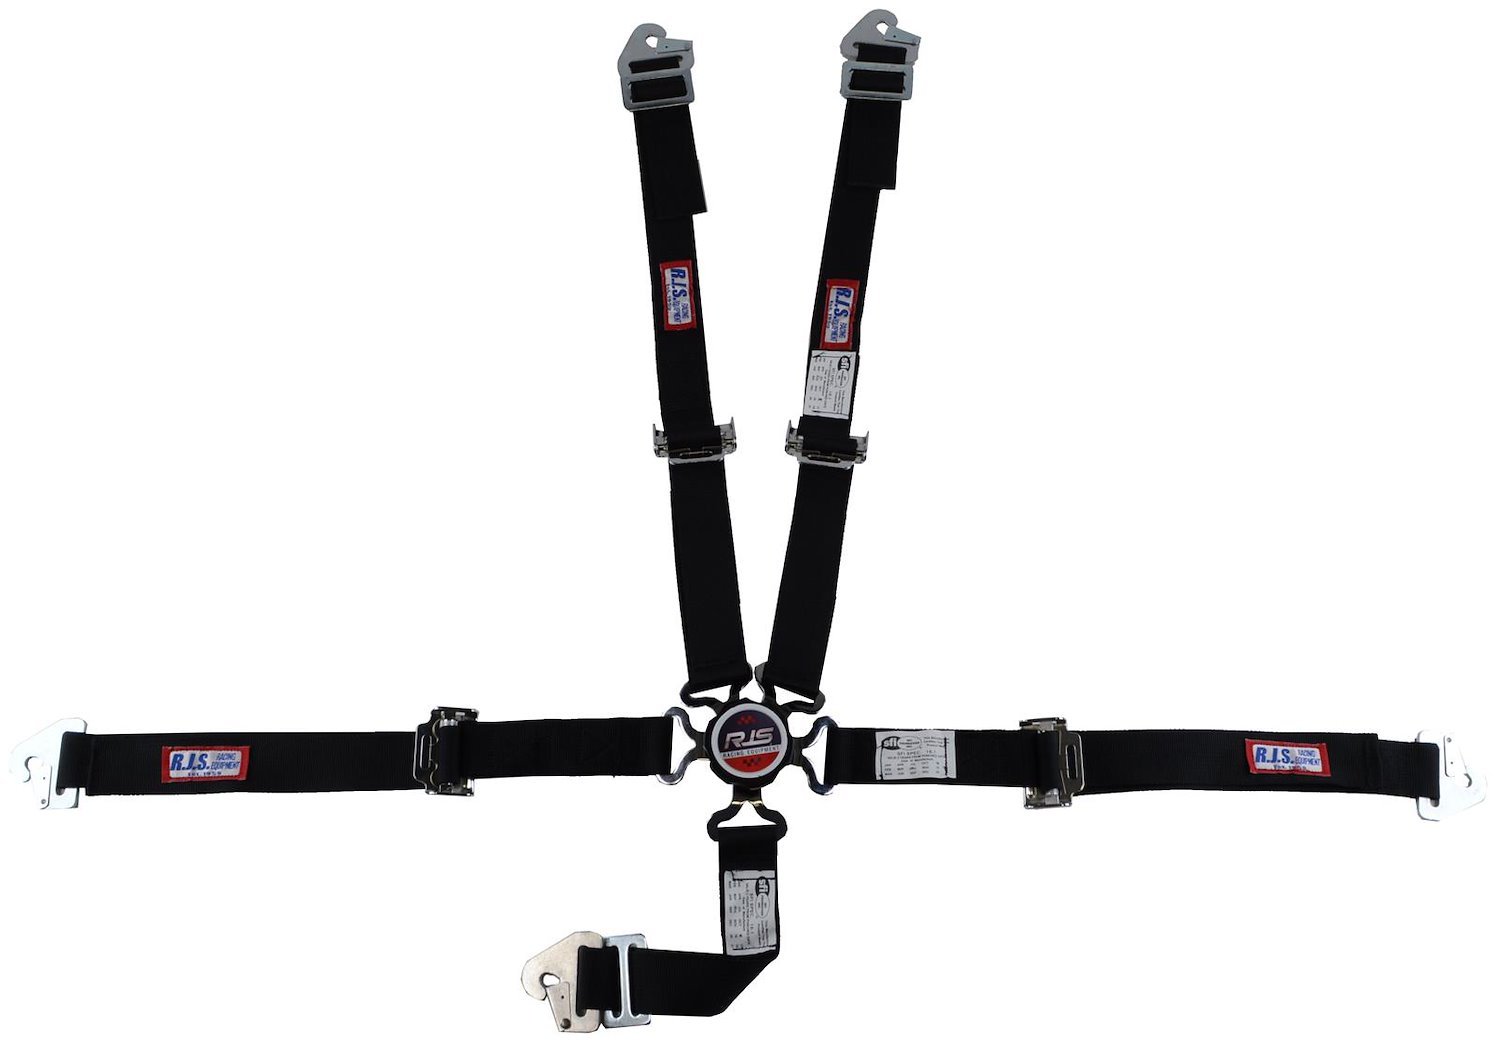 SFI 16.1 CAM-LOCK HARNESS 2 PULL UP Lap Belt 2 Shoulder Harness Individual ROLL BAR Mount 2 DOUBLE Sub ALL WRAP/BOLT ENDS BLACK